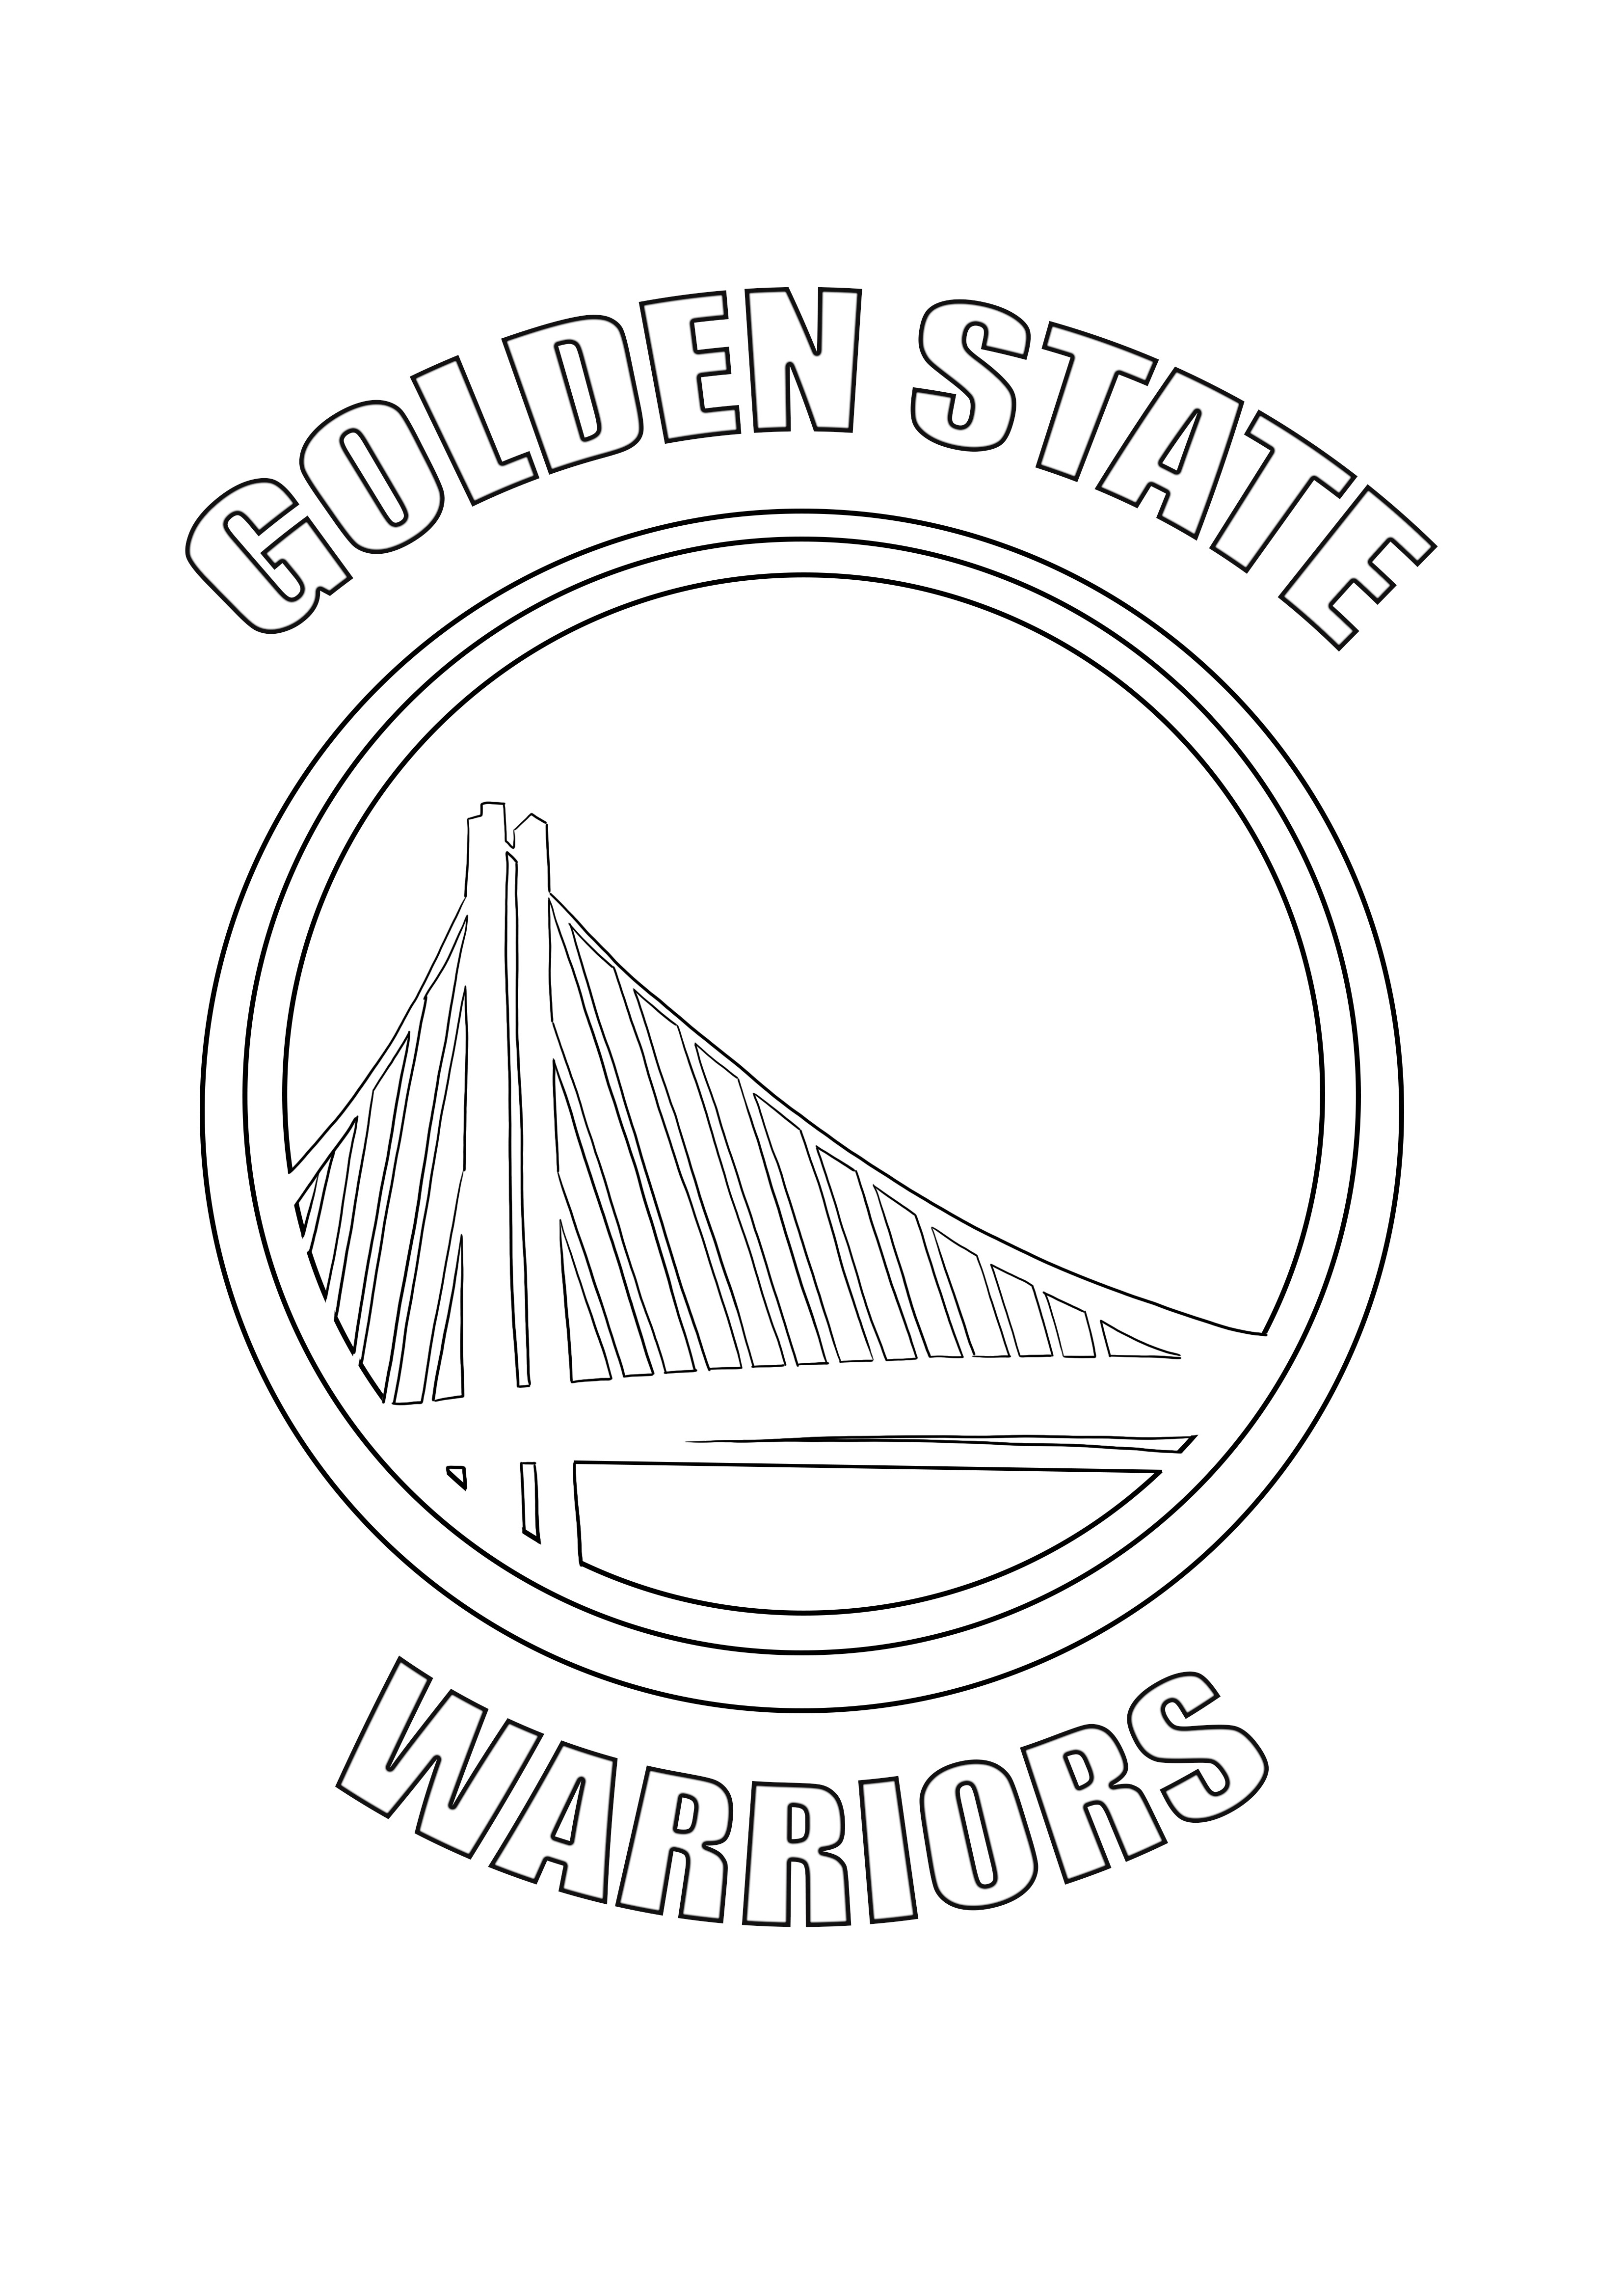 Golden state warrrs logo for free printing and coloring page